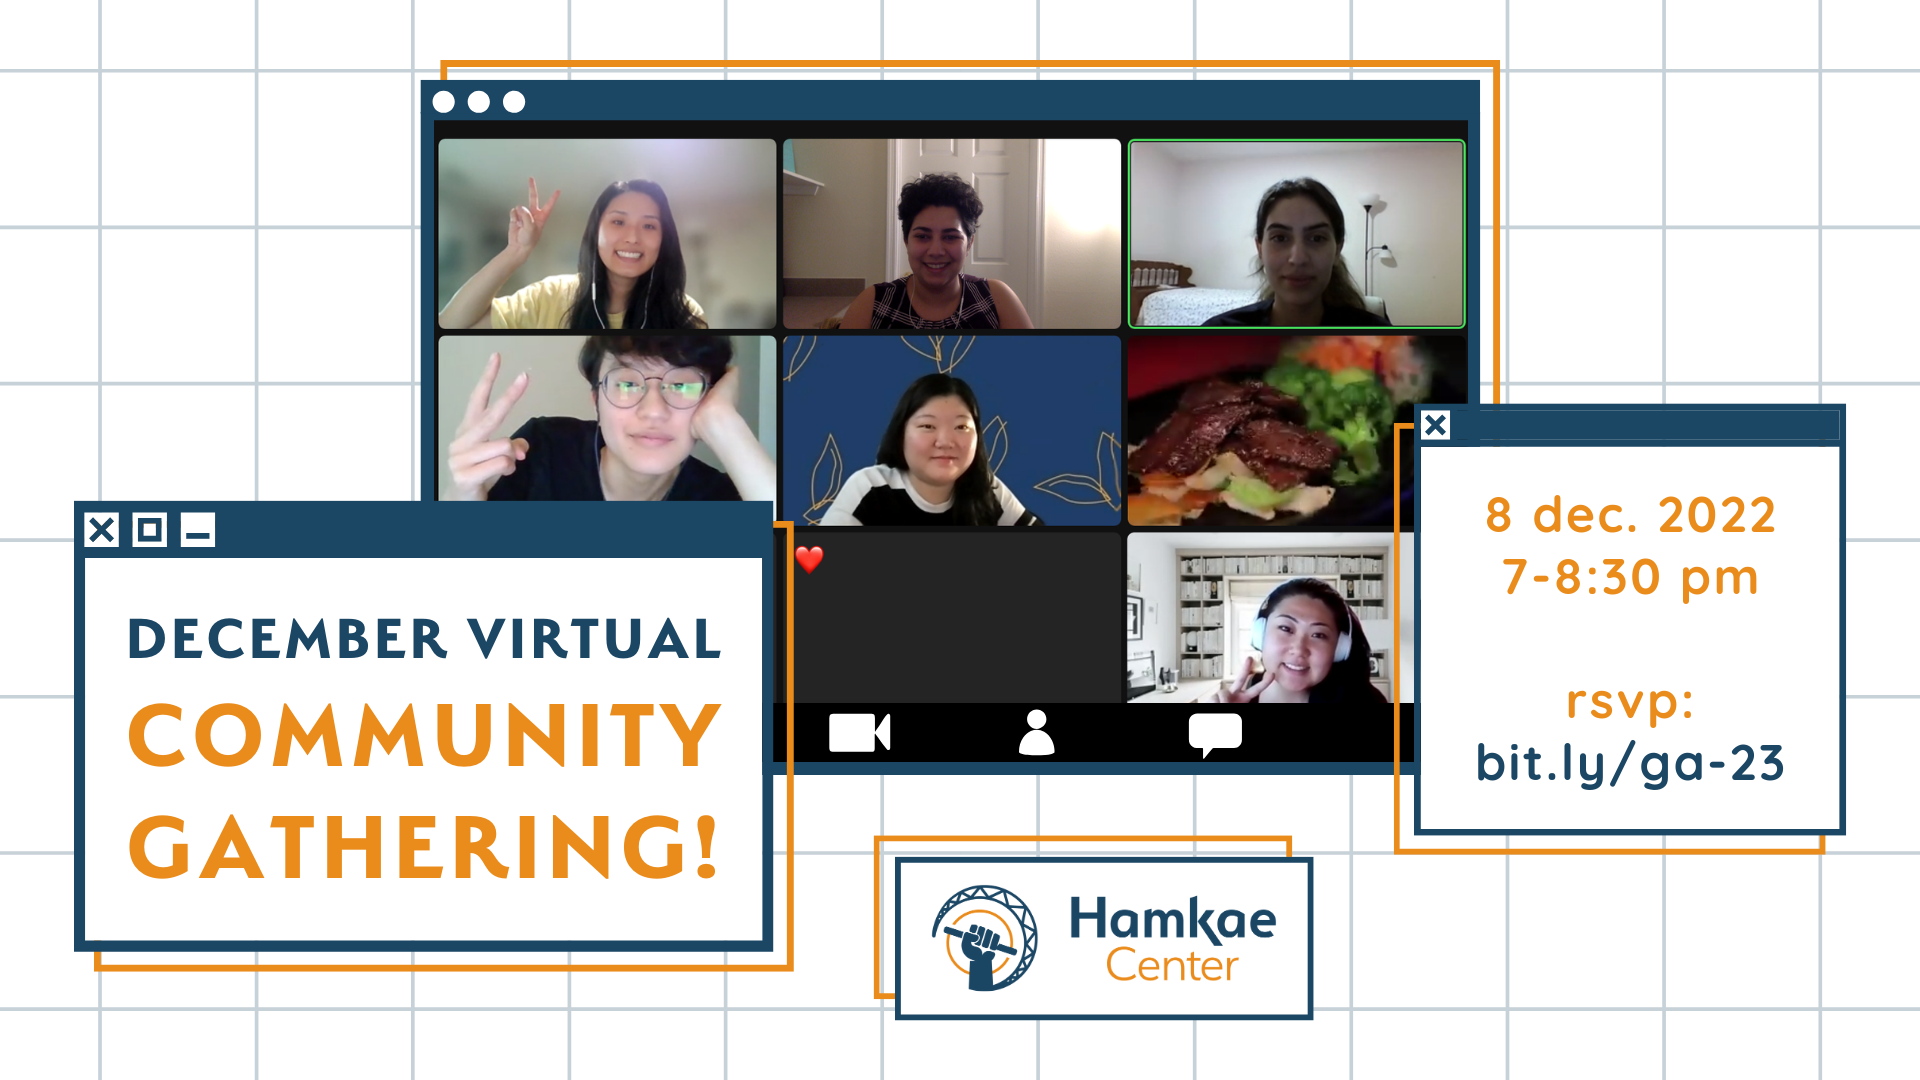 Graphic with a photo of Hamkae Center staff and community members smiling for a screenshot during a virtual meeting, advertising Hamkae Center's December Virtual Community Gathering on December 8, 2022 at 7-8:30pm. RSVP: bit.ly/ga-23